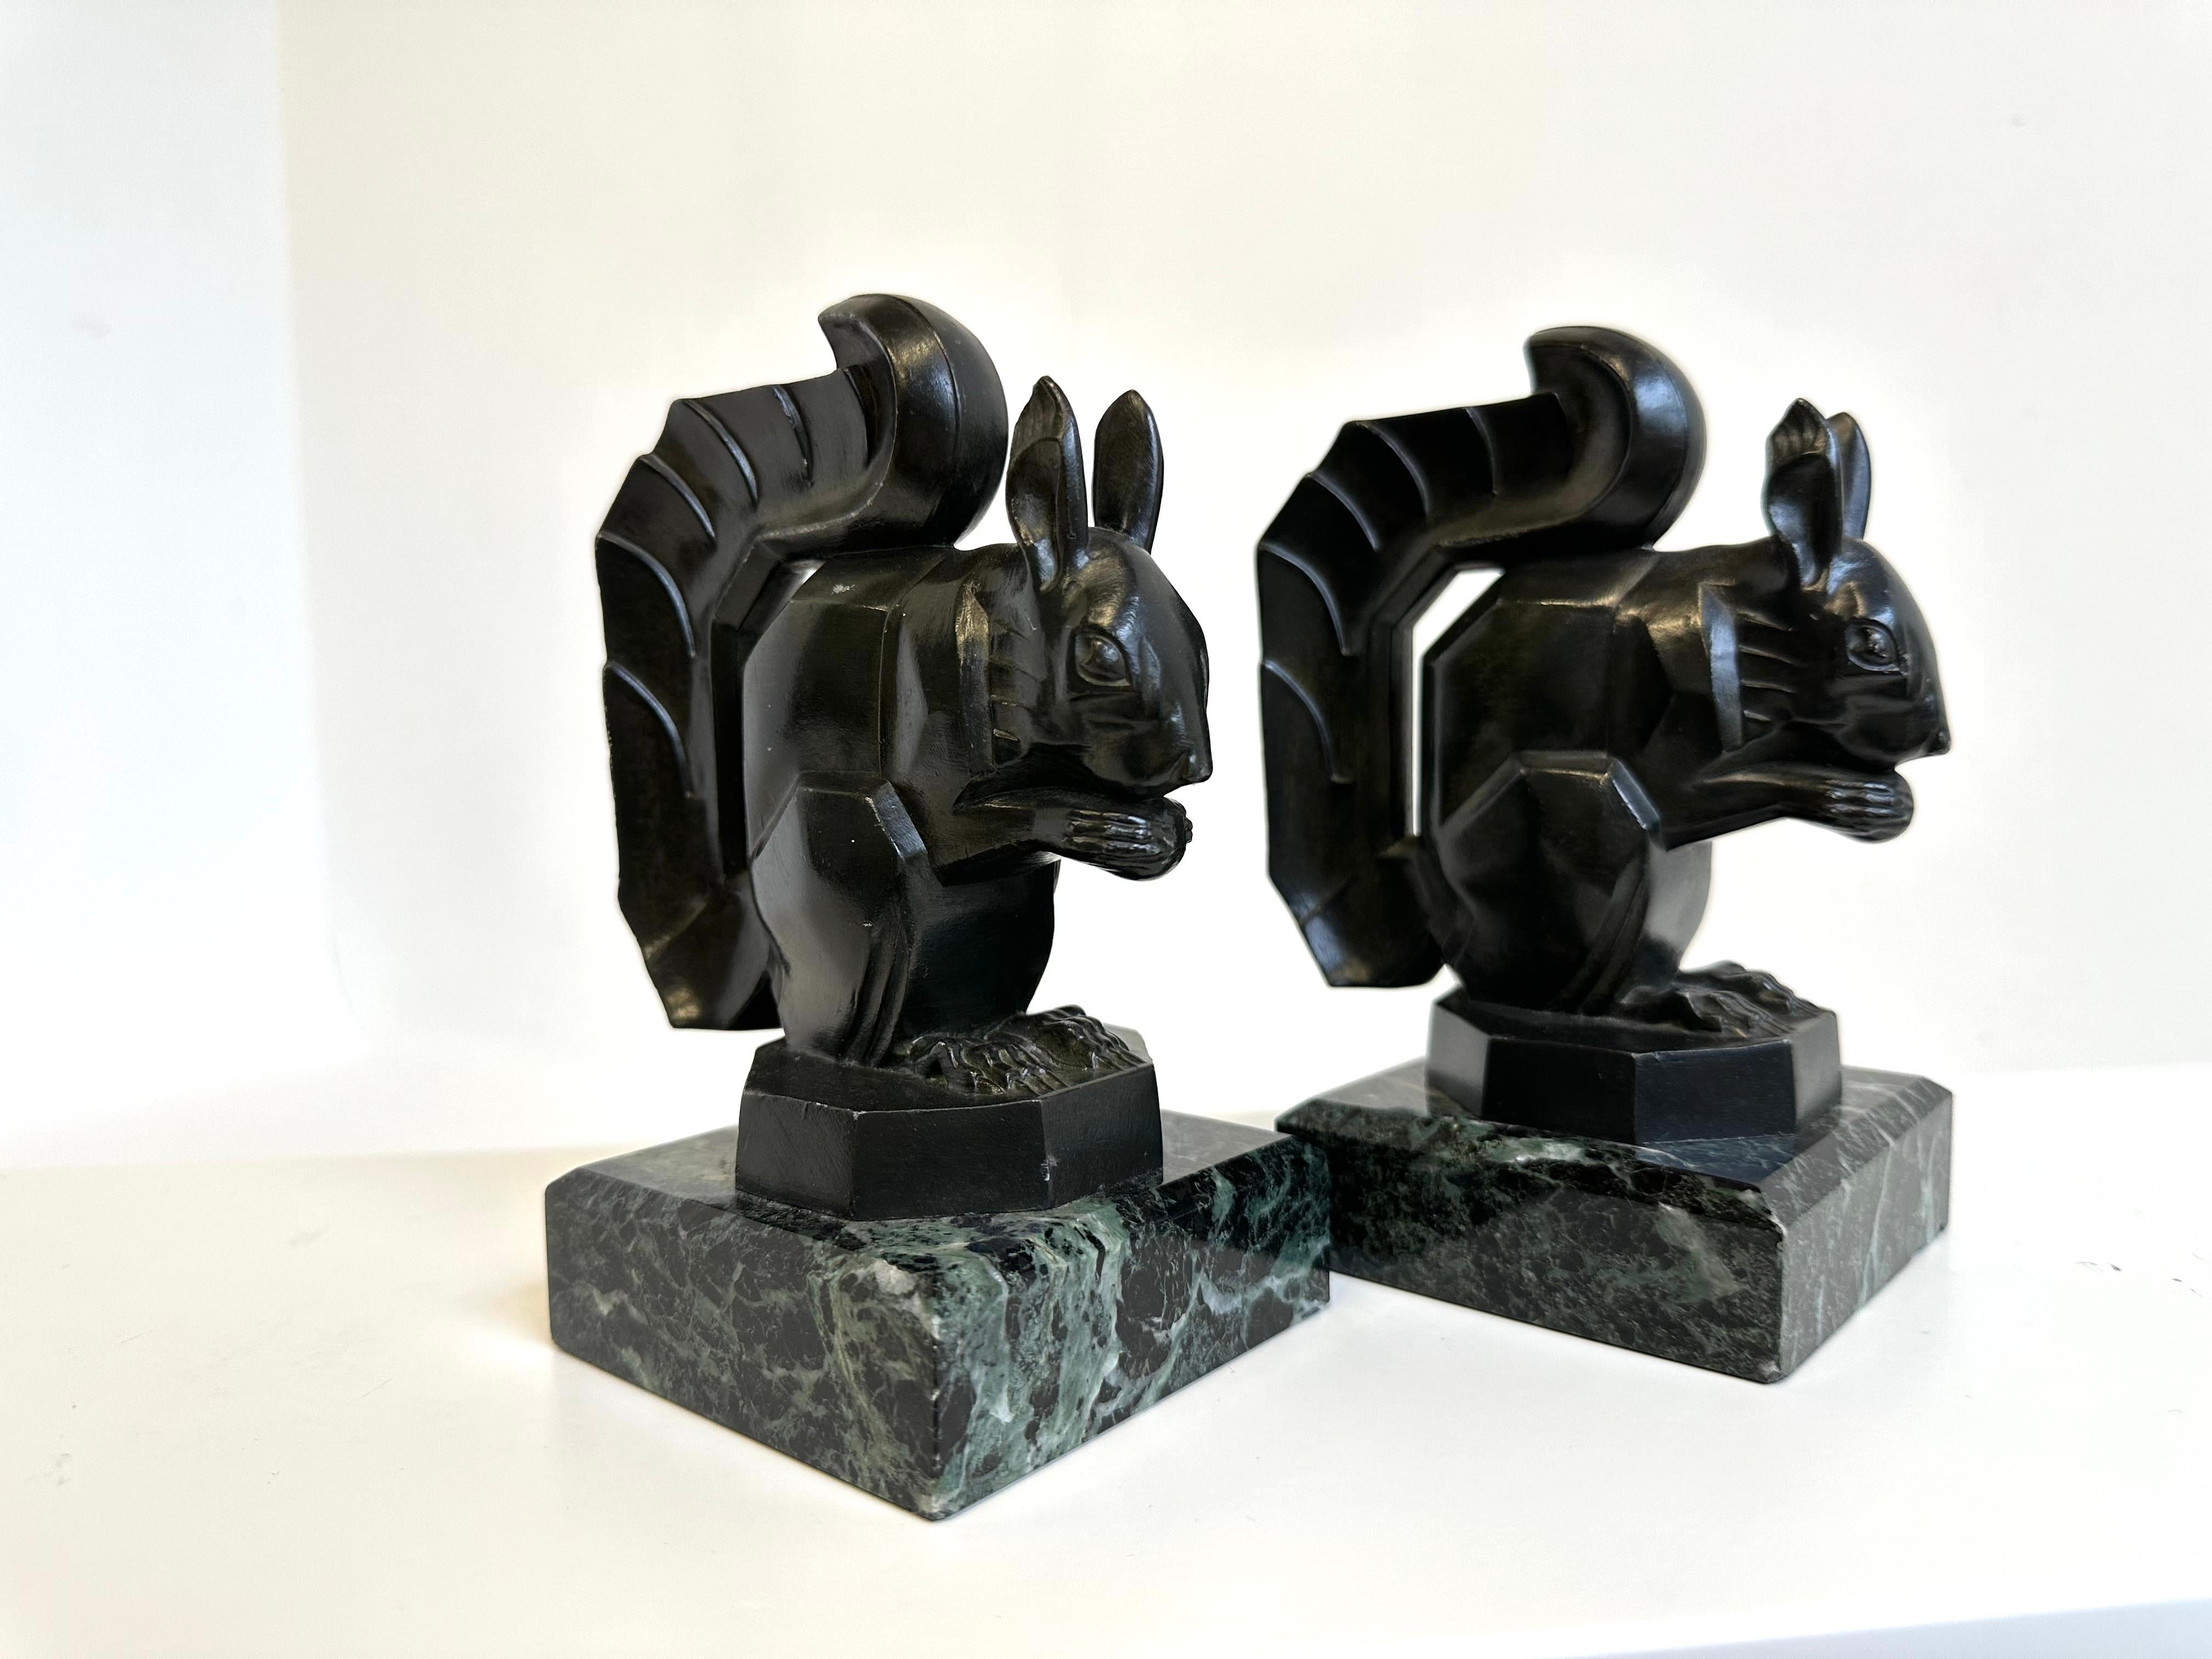 Antique Art Deco ''Squirrel'' Bookends by Max Le Verrier 1930 France Marble For Sale 1